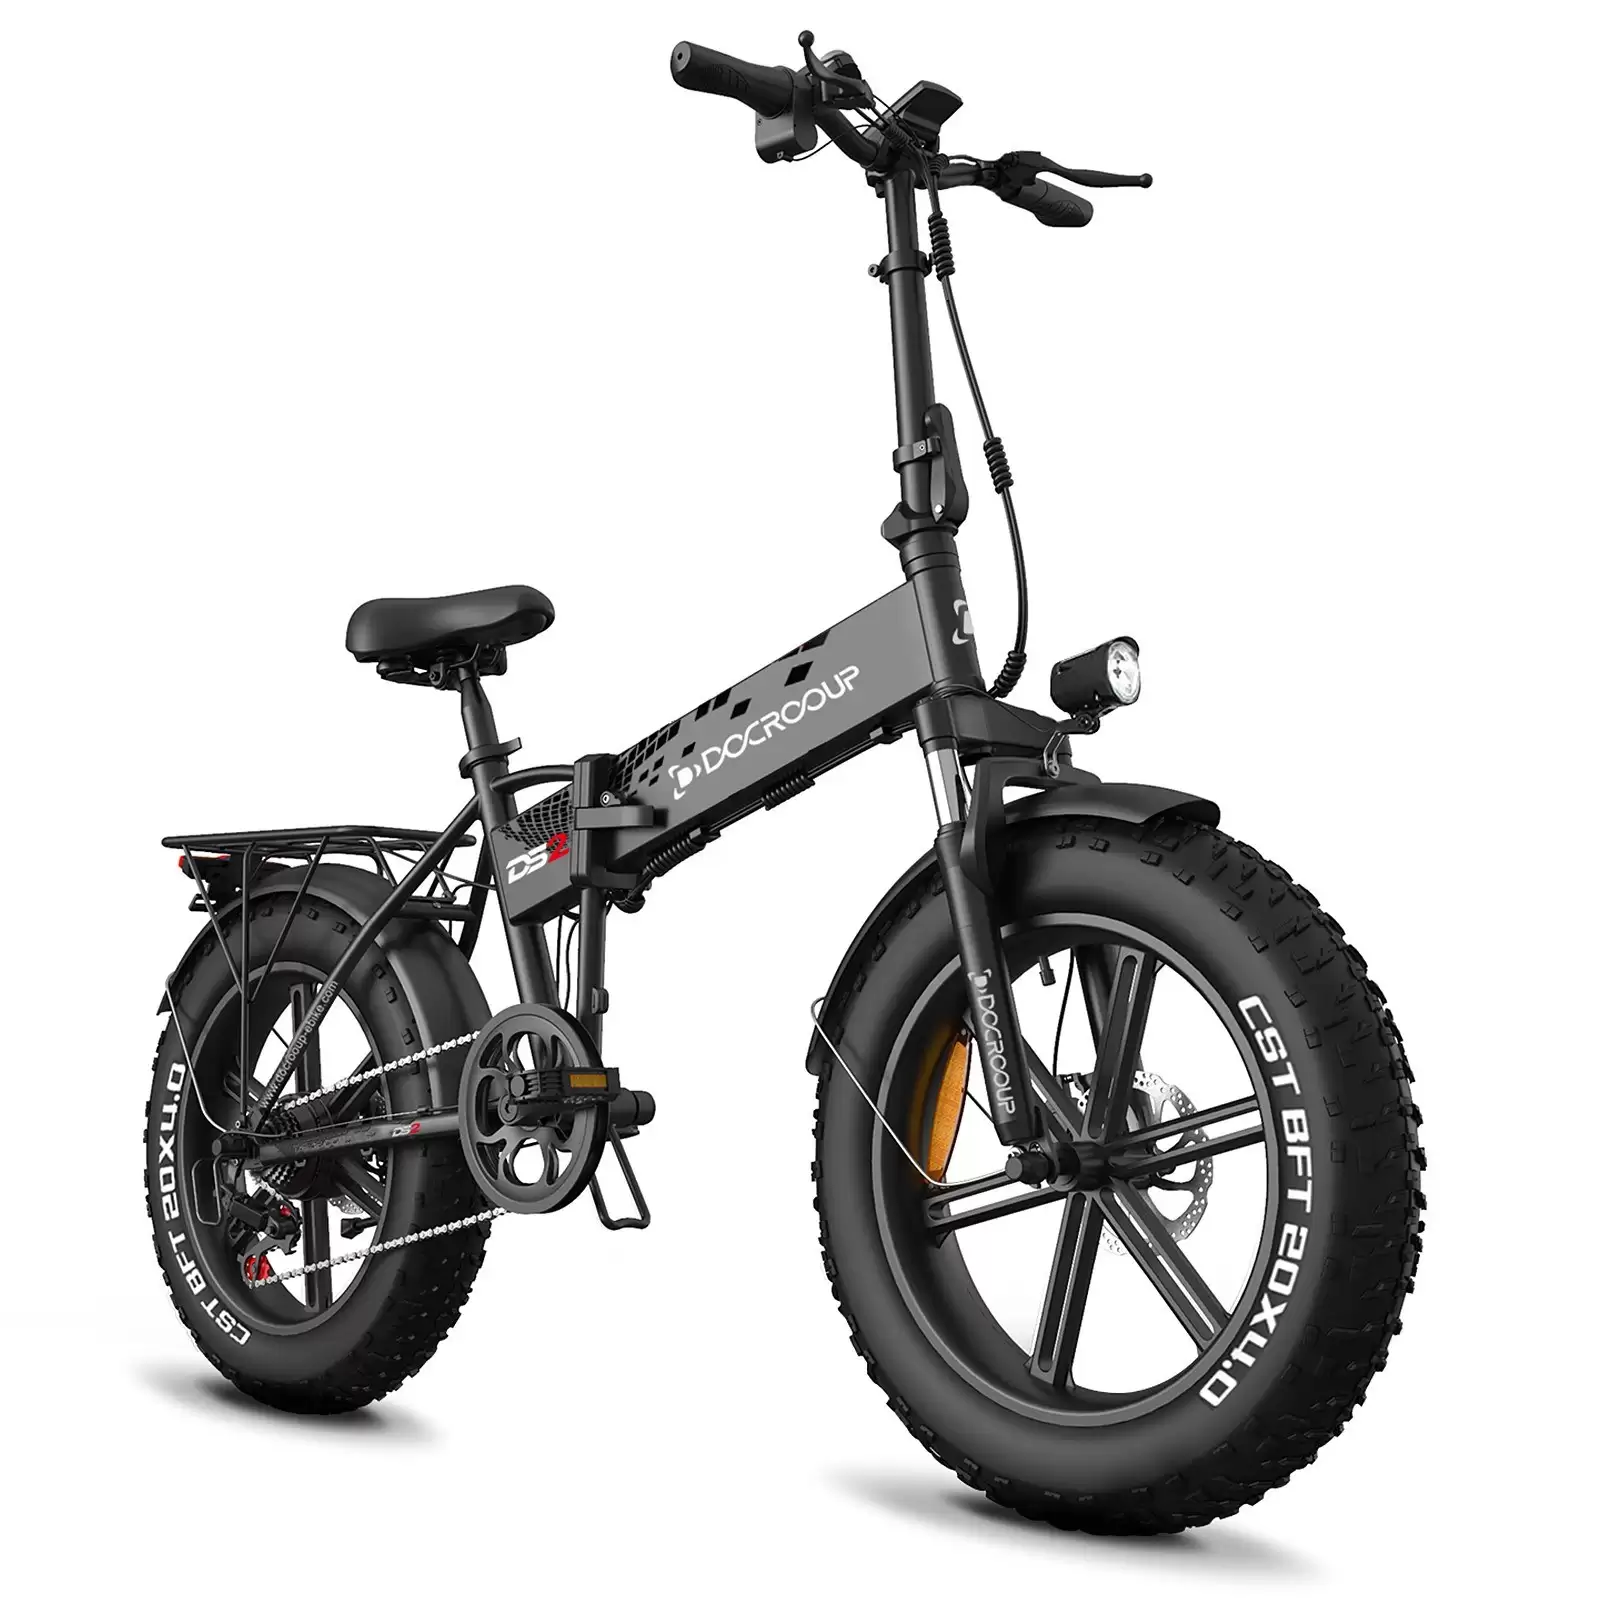 Order In Just $1259.99 [Eu Warehouse] Docrooup 20inch Folding Electric Bike With Turn Signals Brake Light With This Discount Coupon At Tomtop